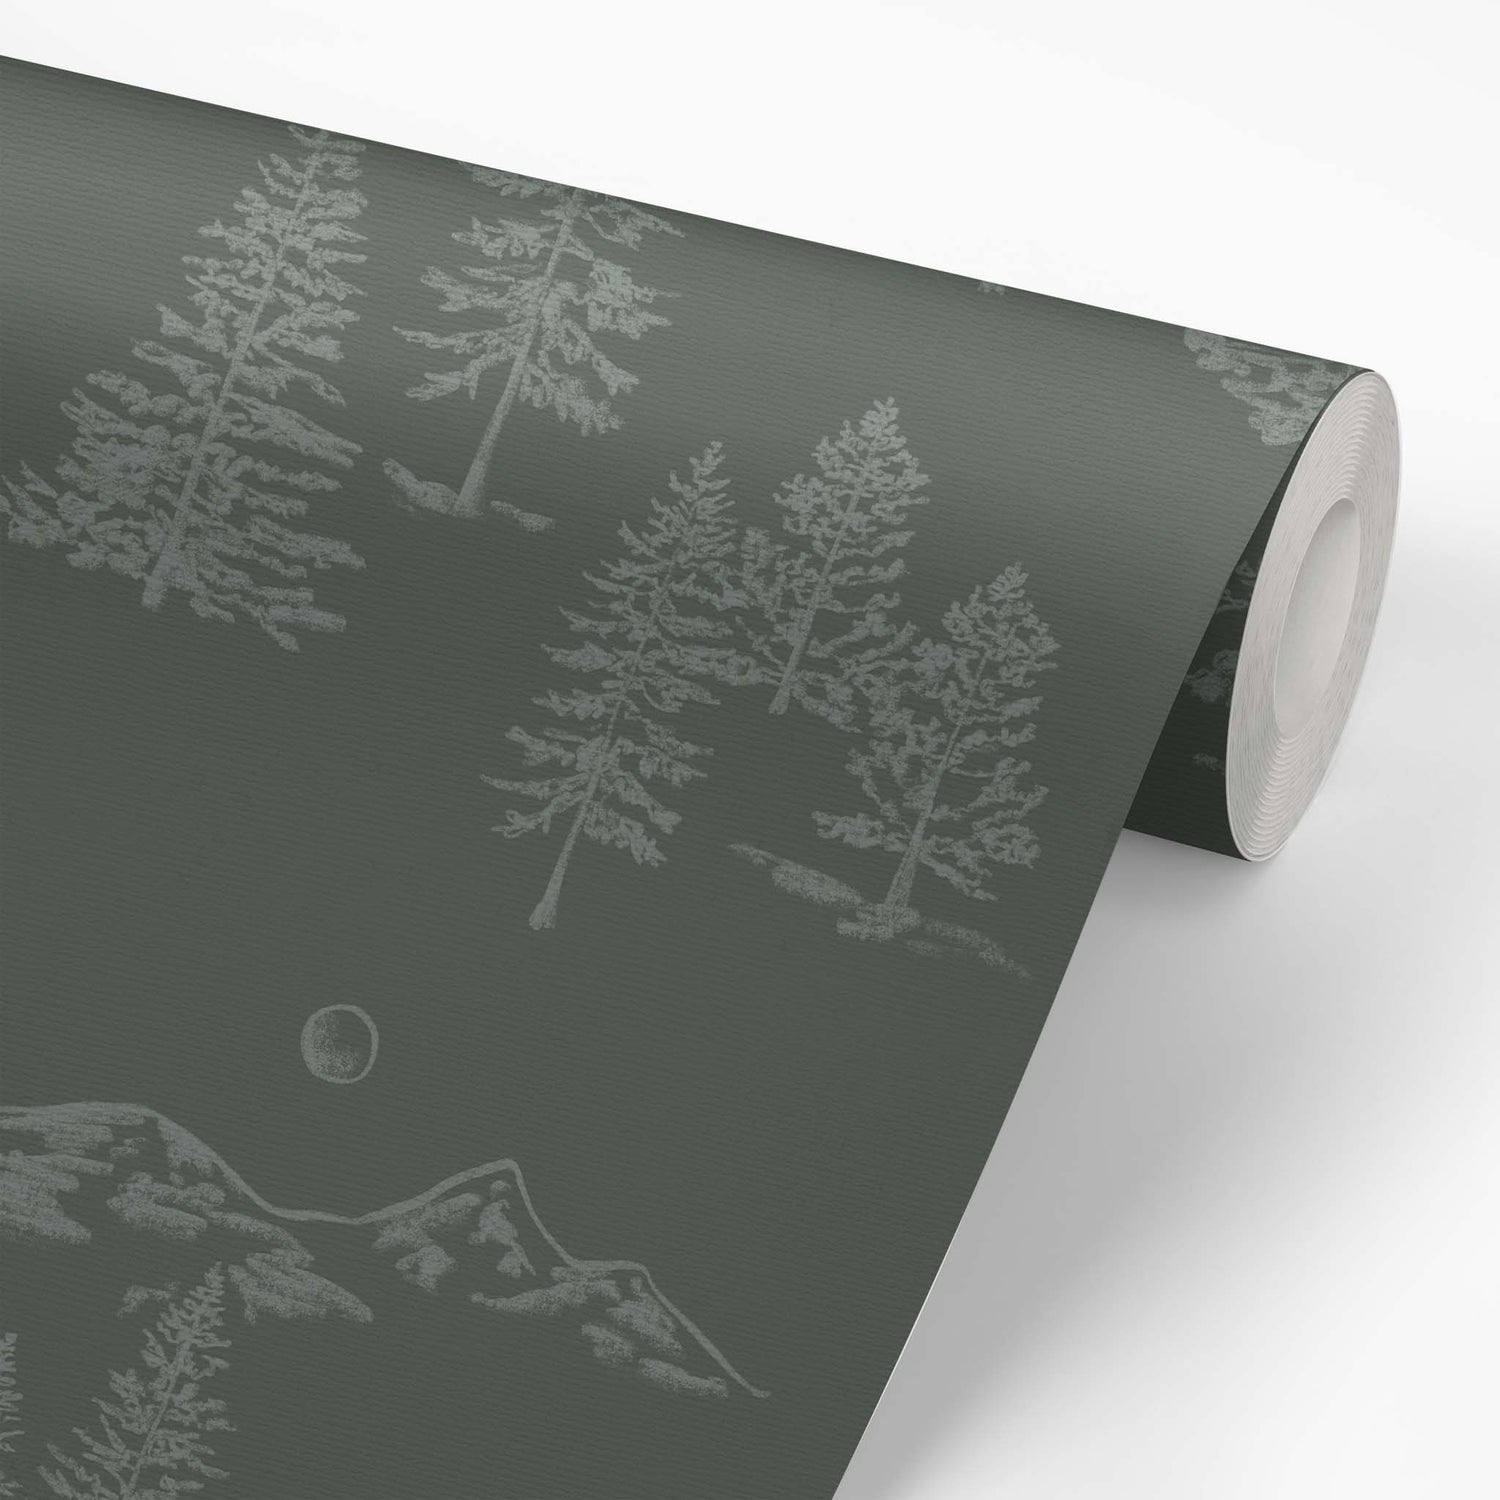 This wallpaper roll shows our Mountain Green Wallpaper in Dark Green. This peel and stick, removable wallpaper was designed by artist Mariah Cottrell and features beautifully sketched mountains and trees.